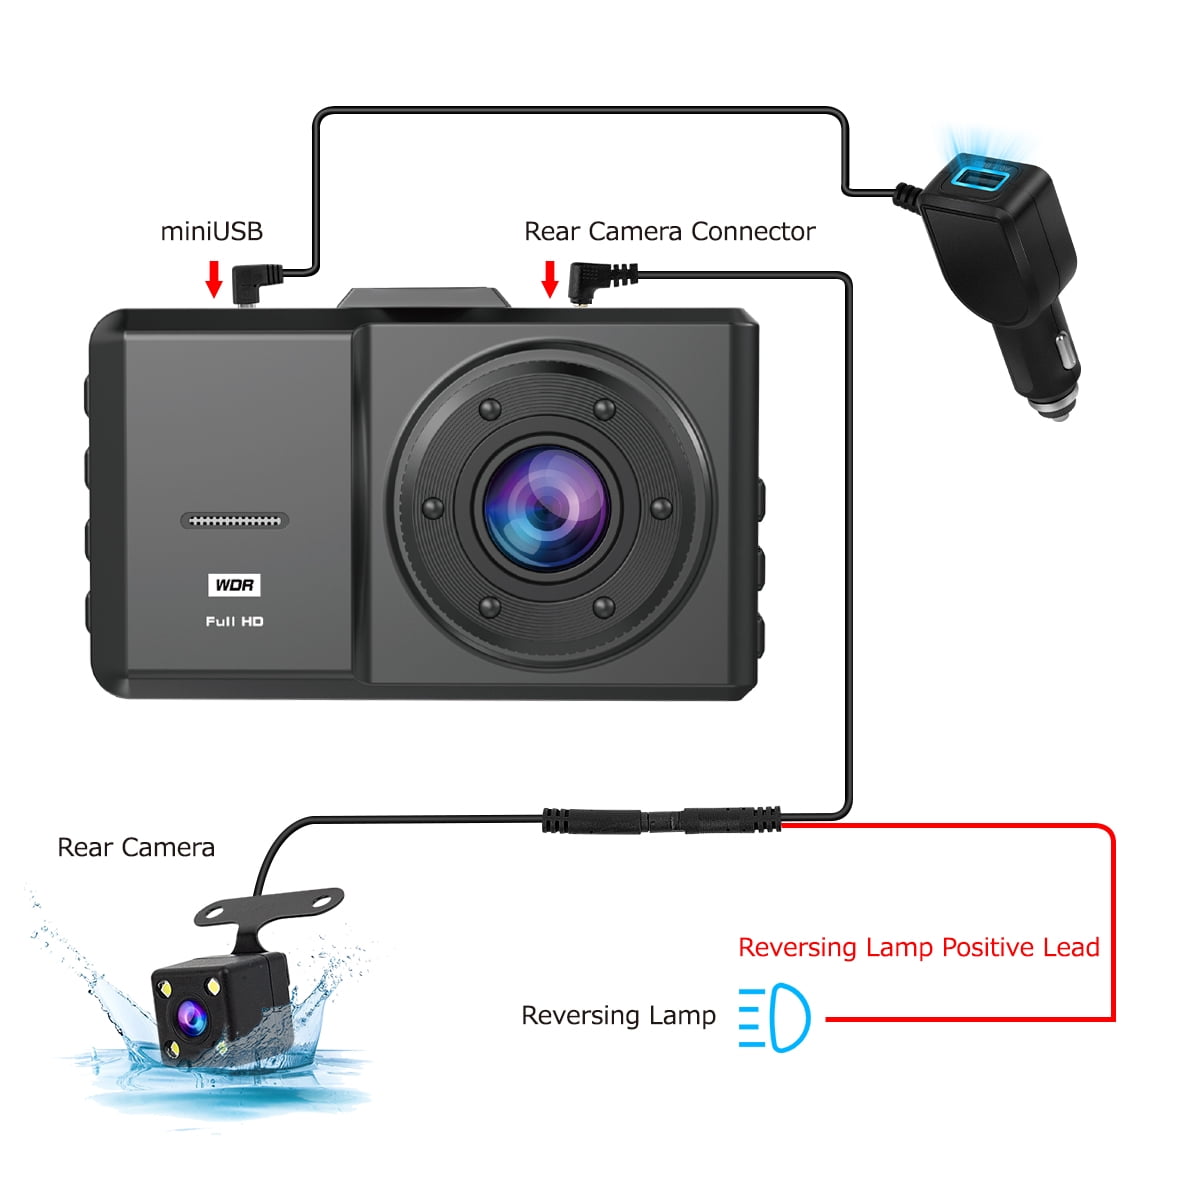 SPADE 3 Channel Dash Cam Front and Rear Inside, 1080P Full HD Dash Camera  for Cars with 32GB SD Card, 170° Wide Angle, 3.16”IPS Screen, Night Vision